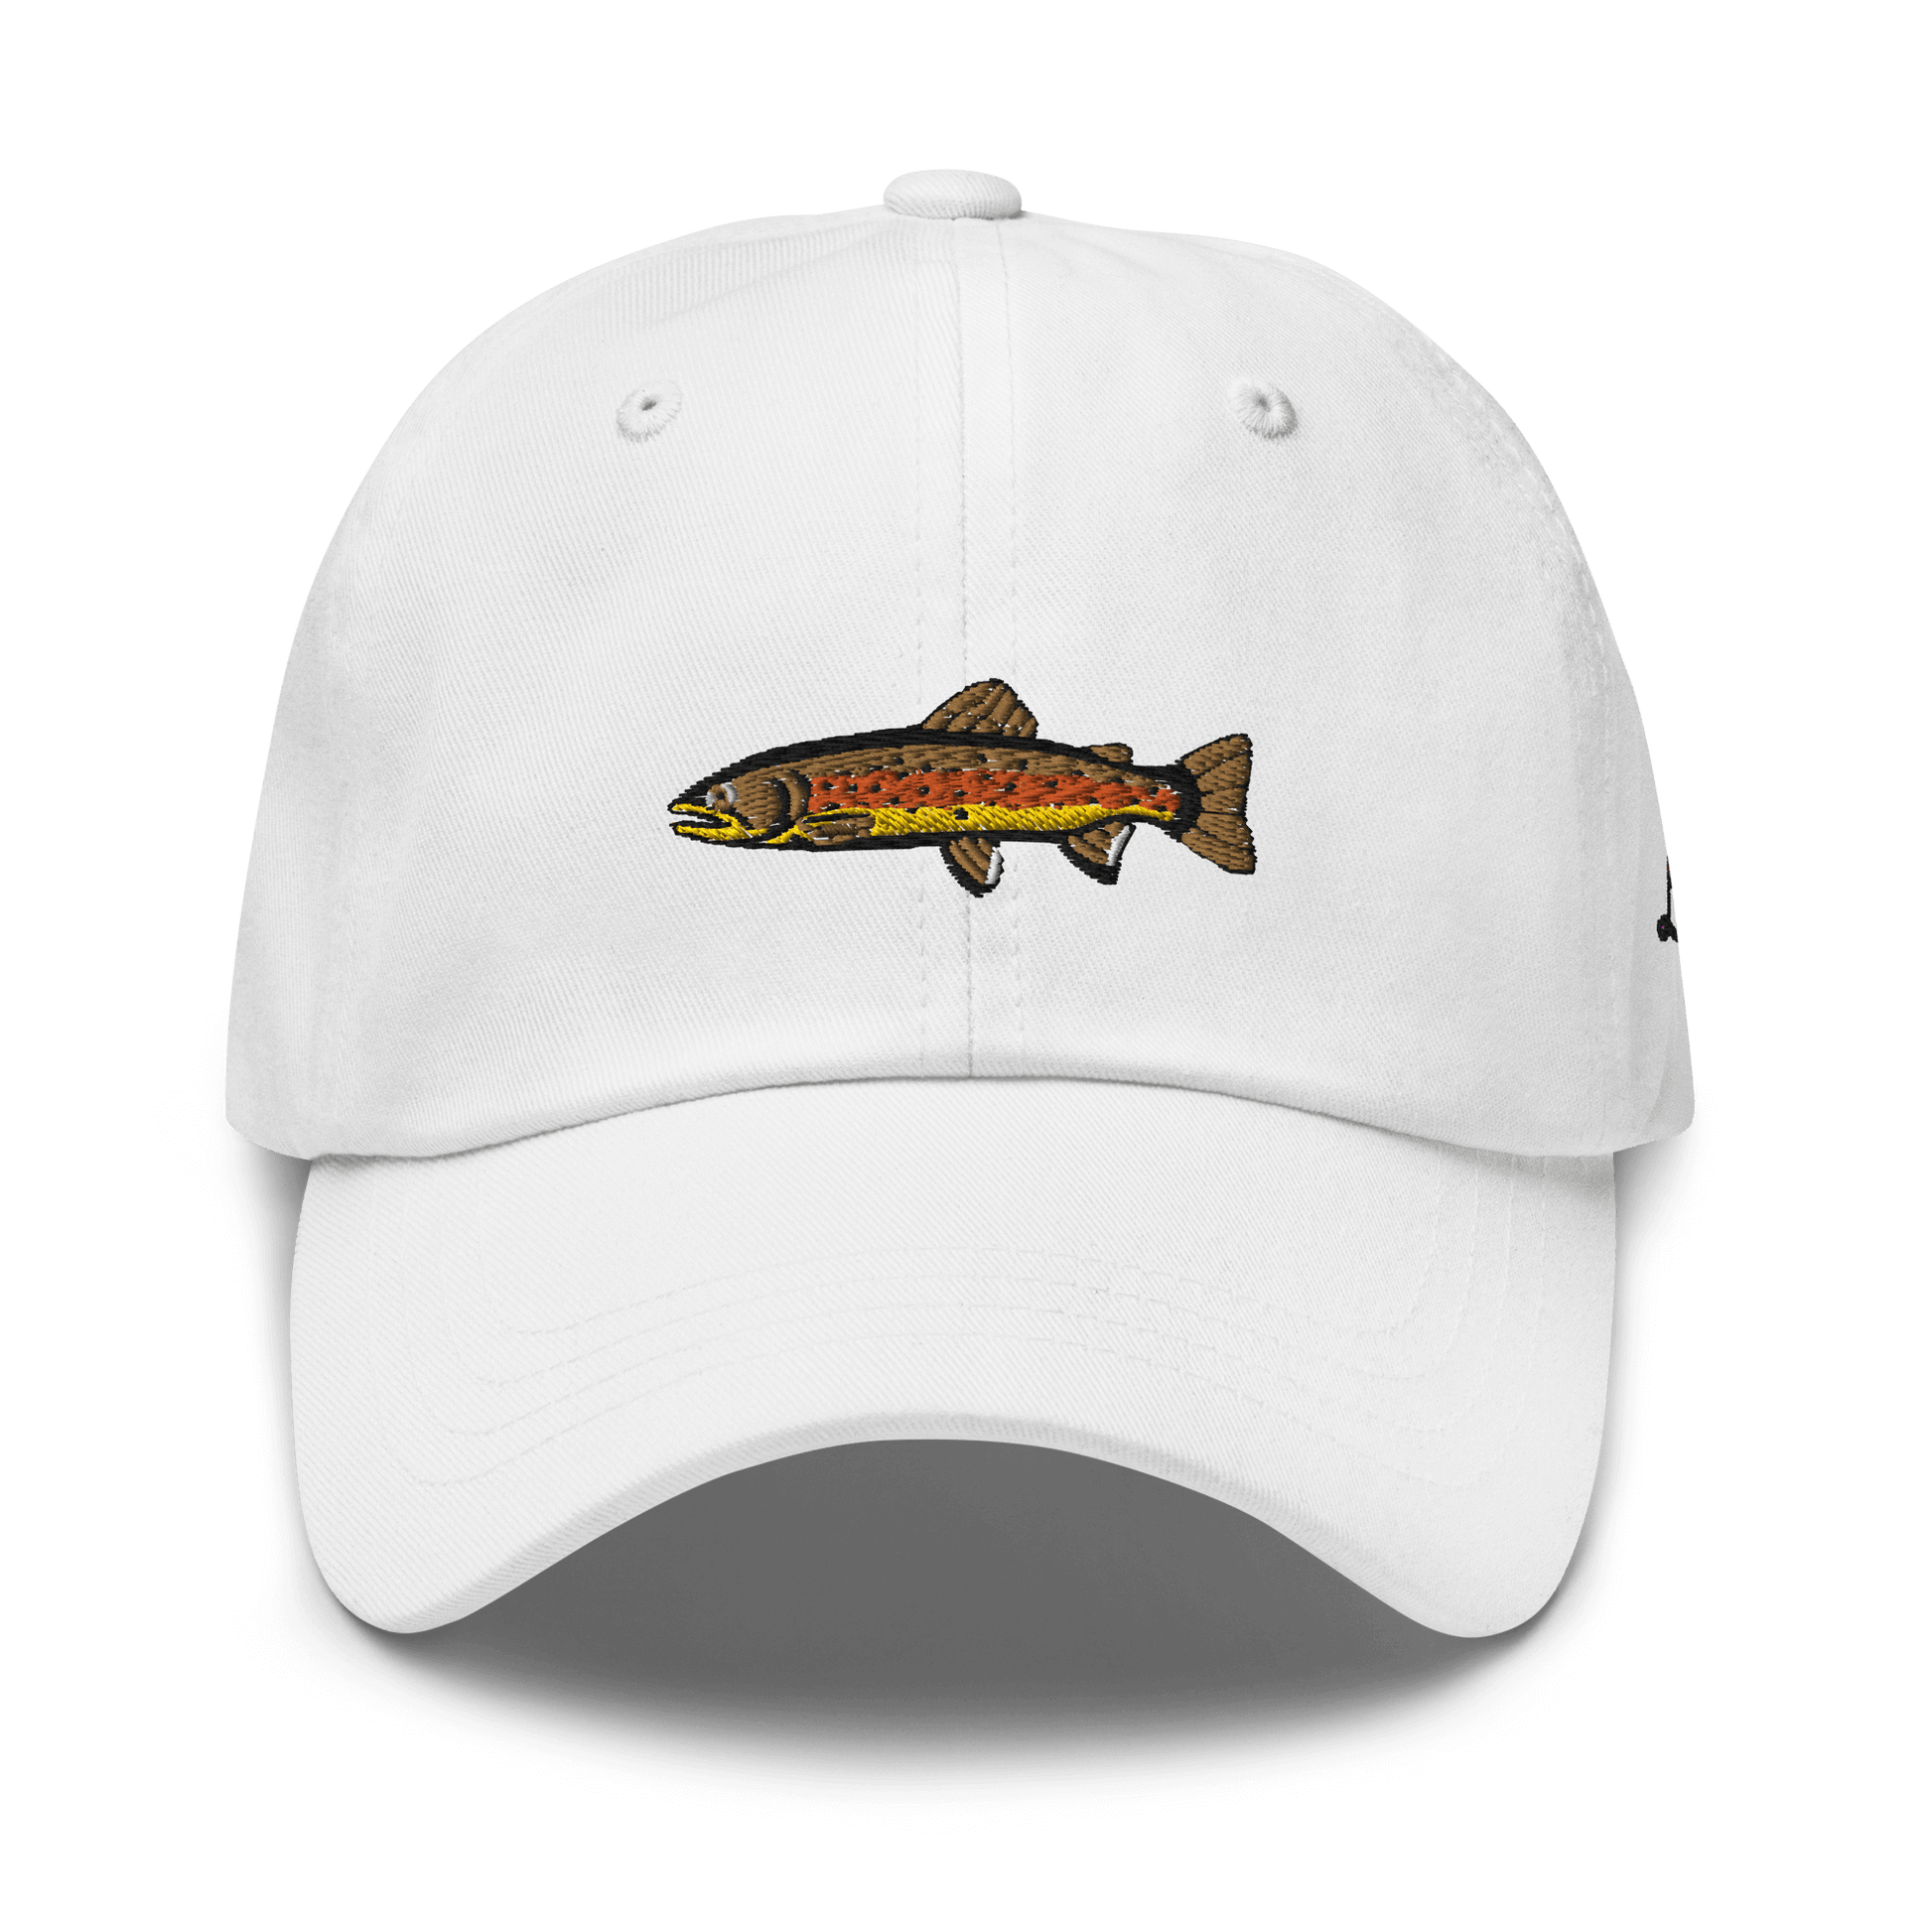 Brown Trout fishing hat. It’s a simple embroidered hat/ dad hat with a brown trout and the lost lure logo on the side. White hat, front side